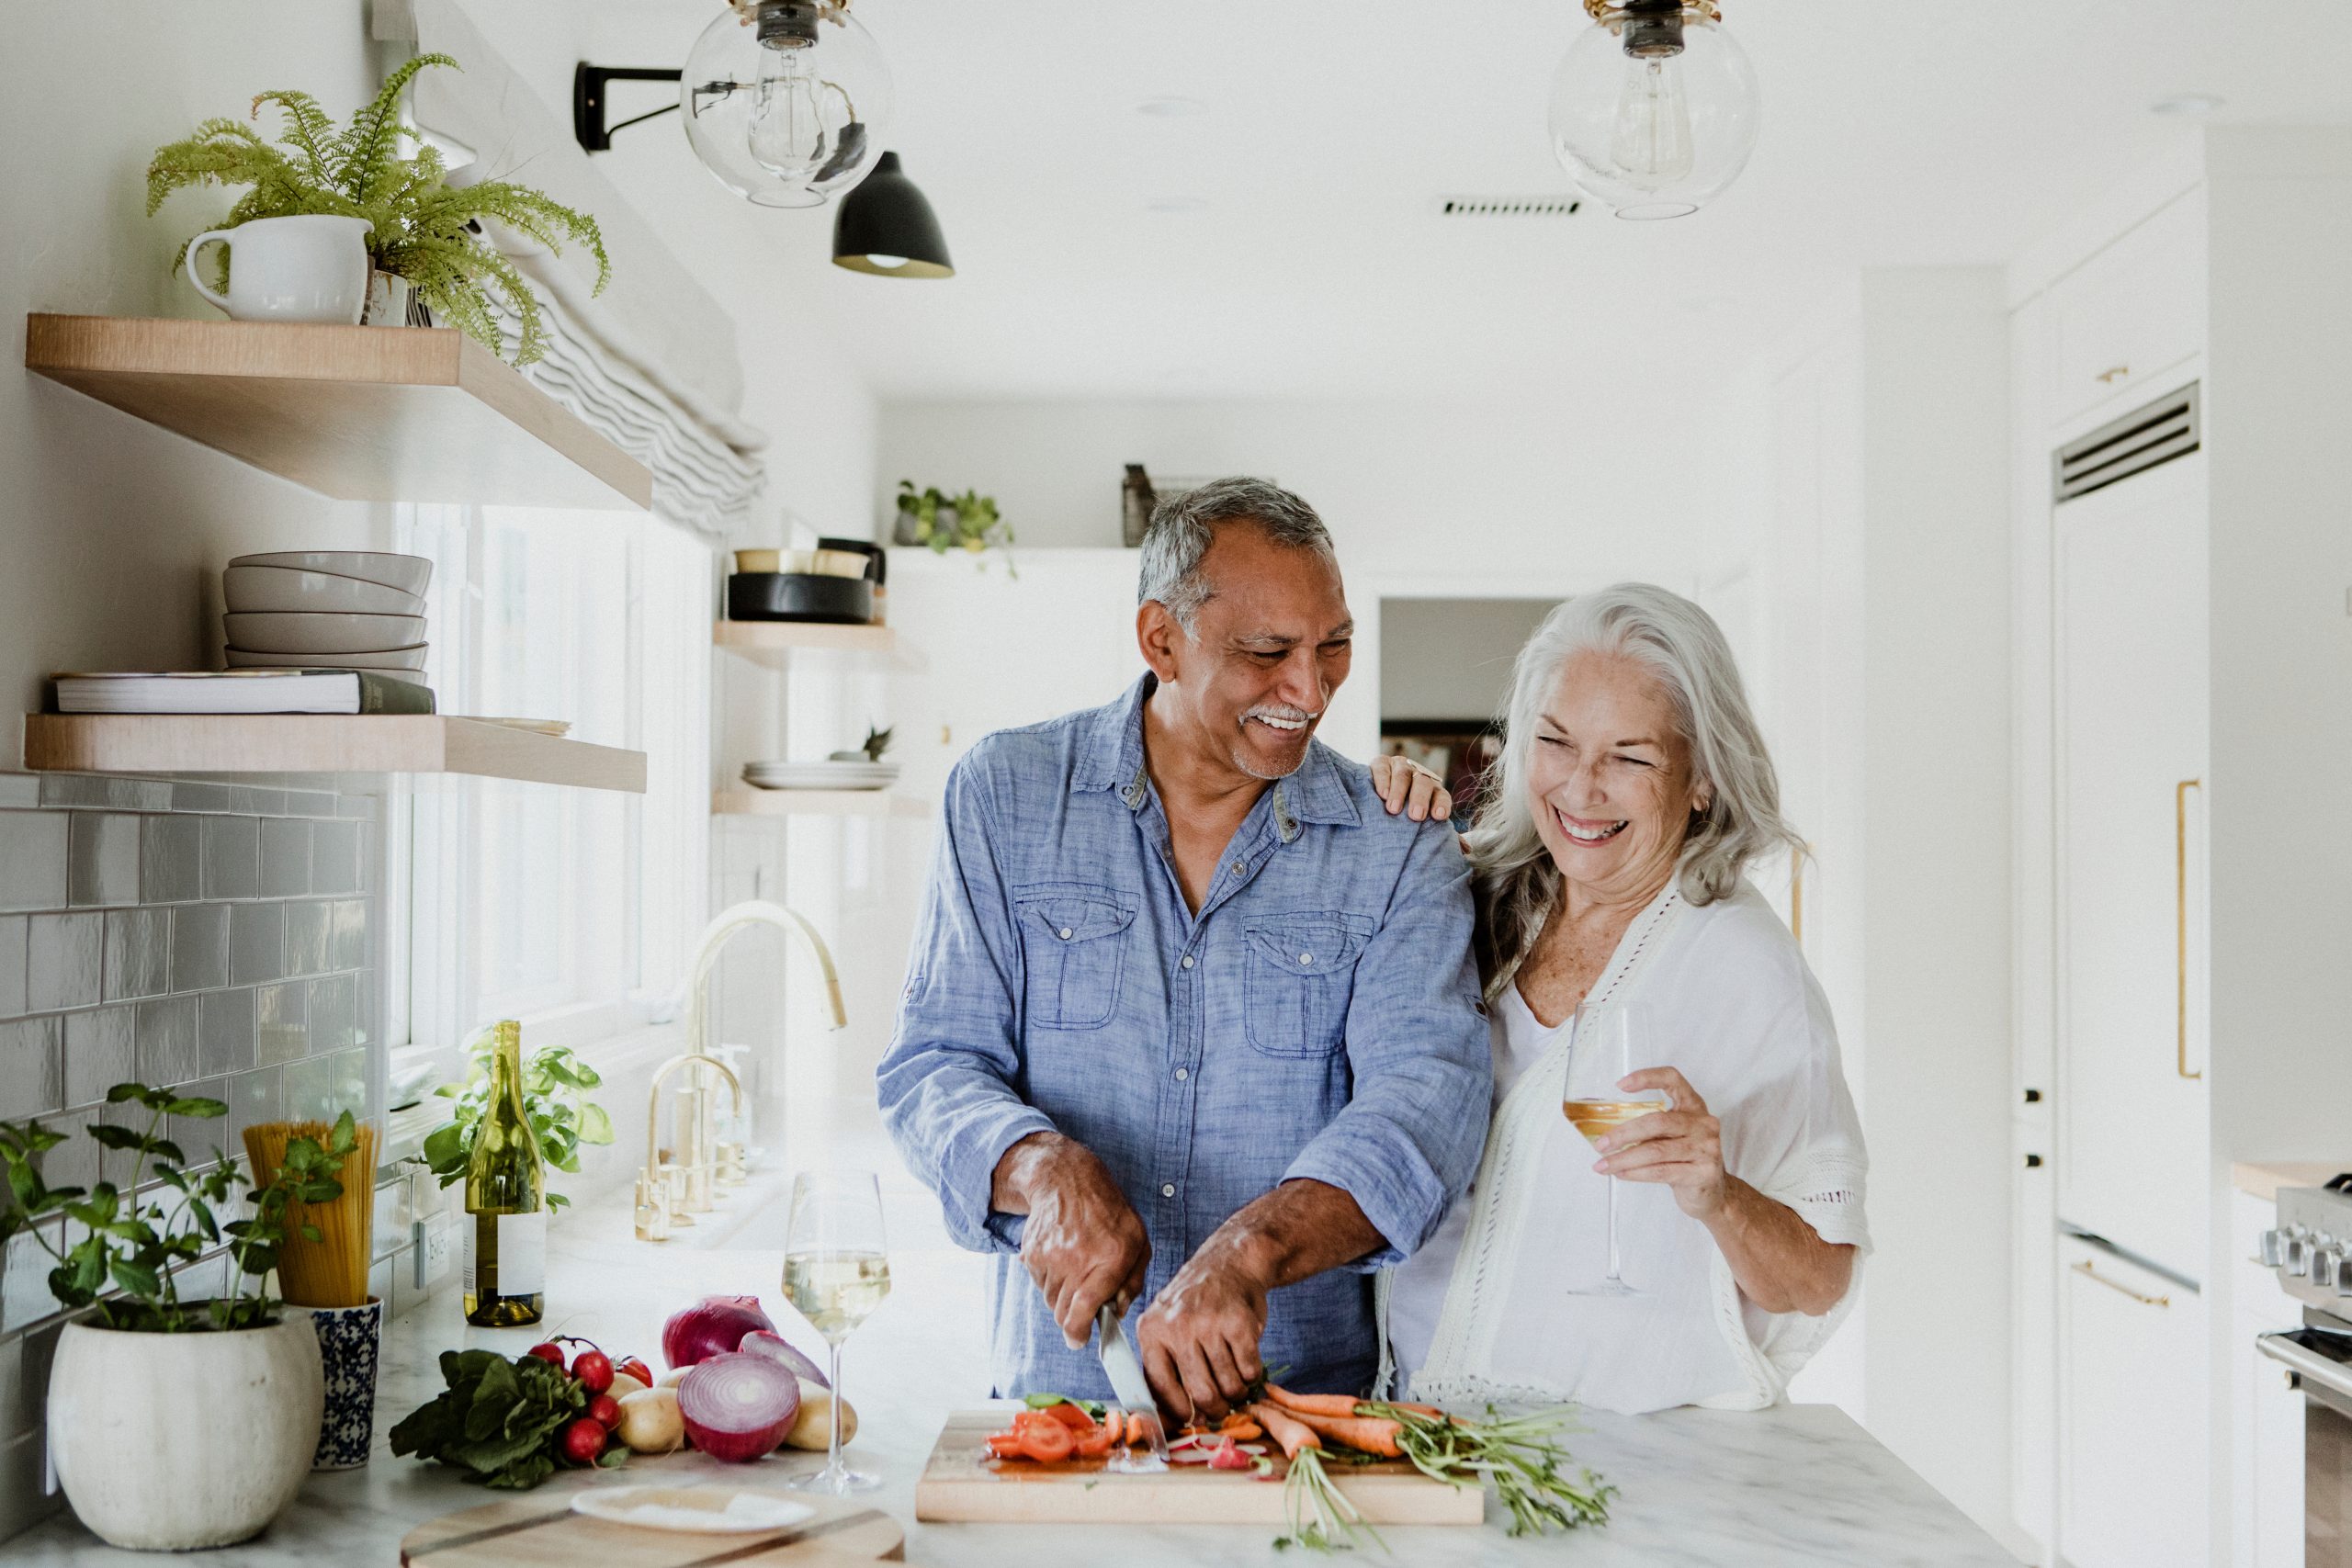 Senior couple laughing together while preparing a healthy meal in a bright kitchen, enjoying life without headache worries.